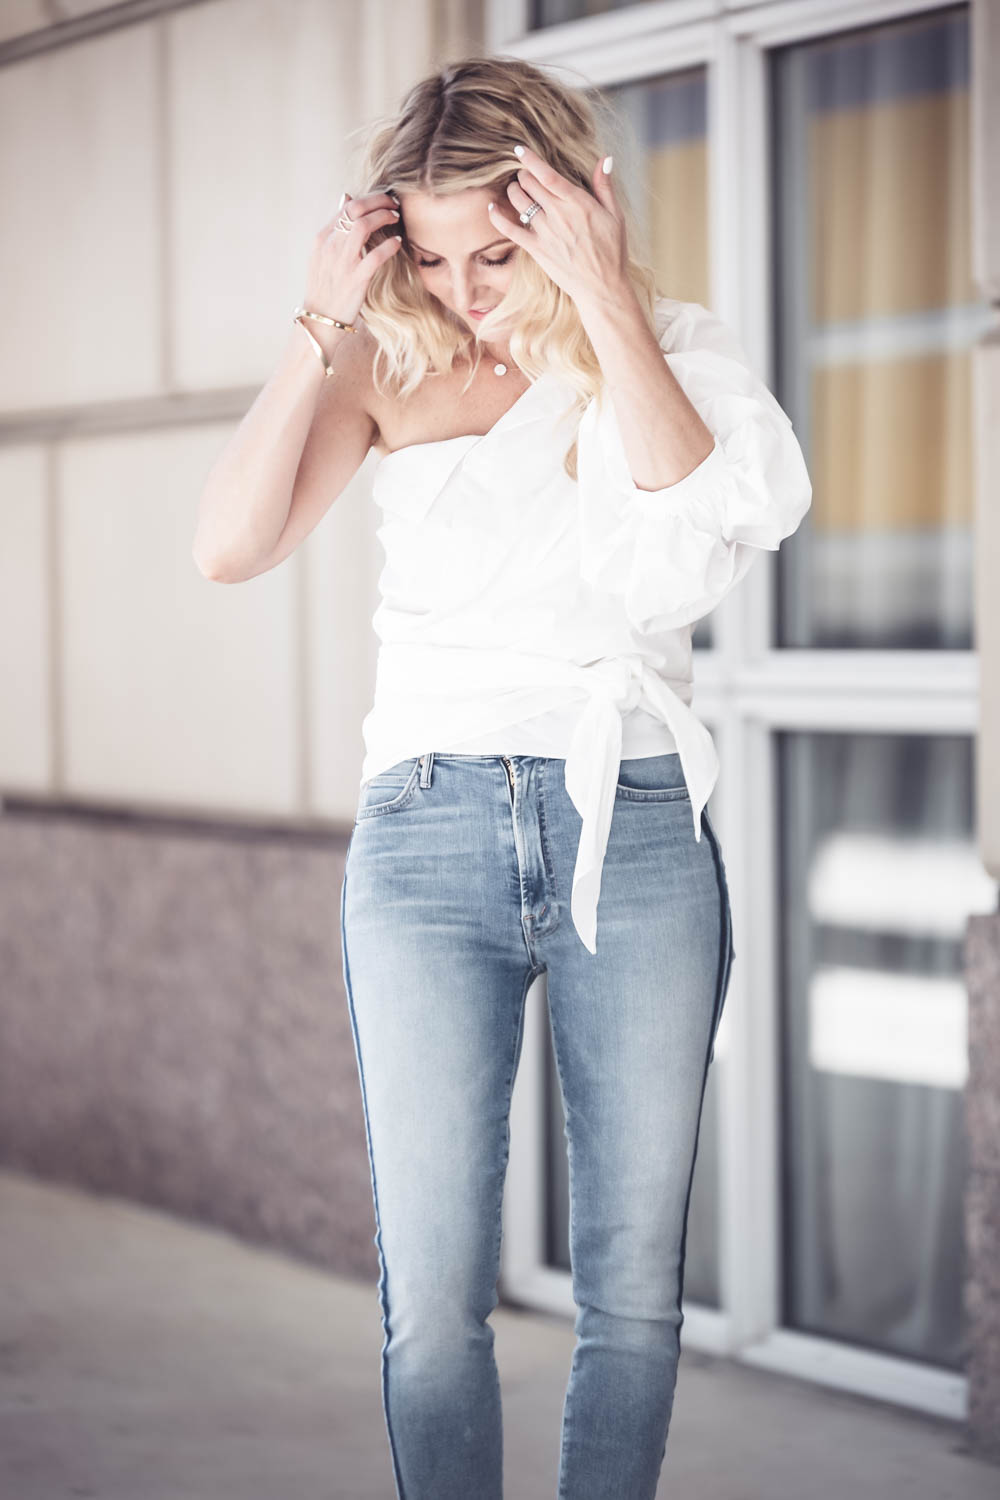 My favorite, most slimming jeans, by mother denim, in kitty racing stripe, with white top, Reward Style Blogger Conference // What I Wore // In this post, I feature 5 outfits that I wore to RStheCON including jeans, dresses, gowns, etc.!